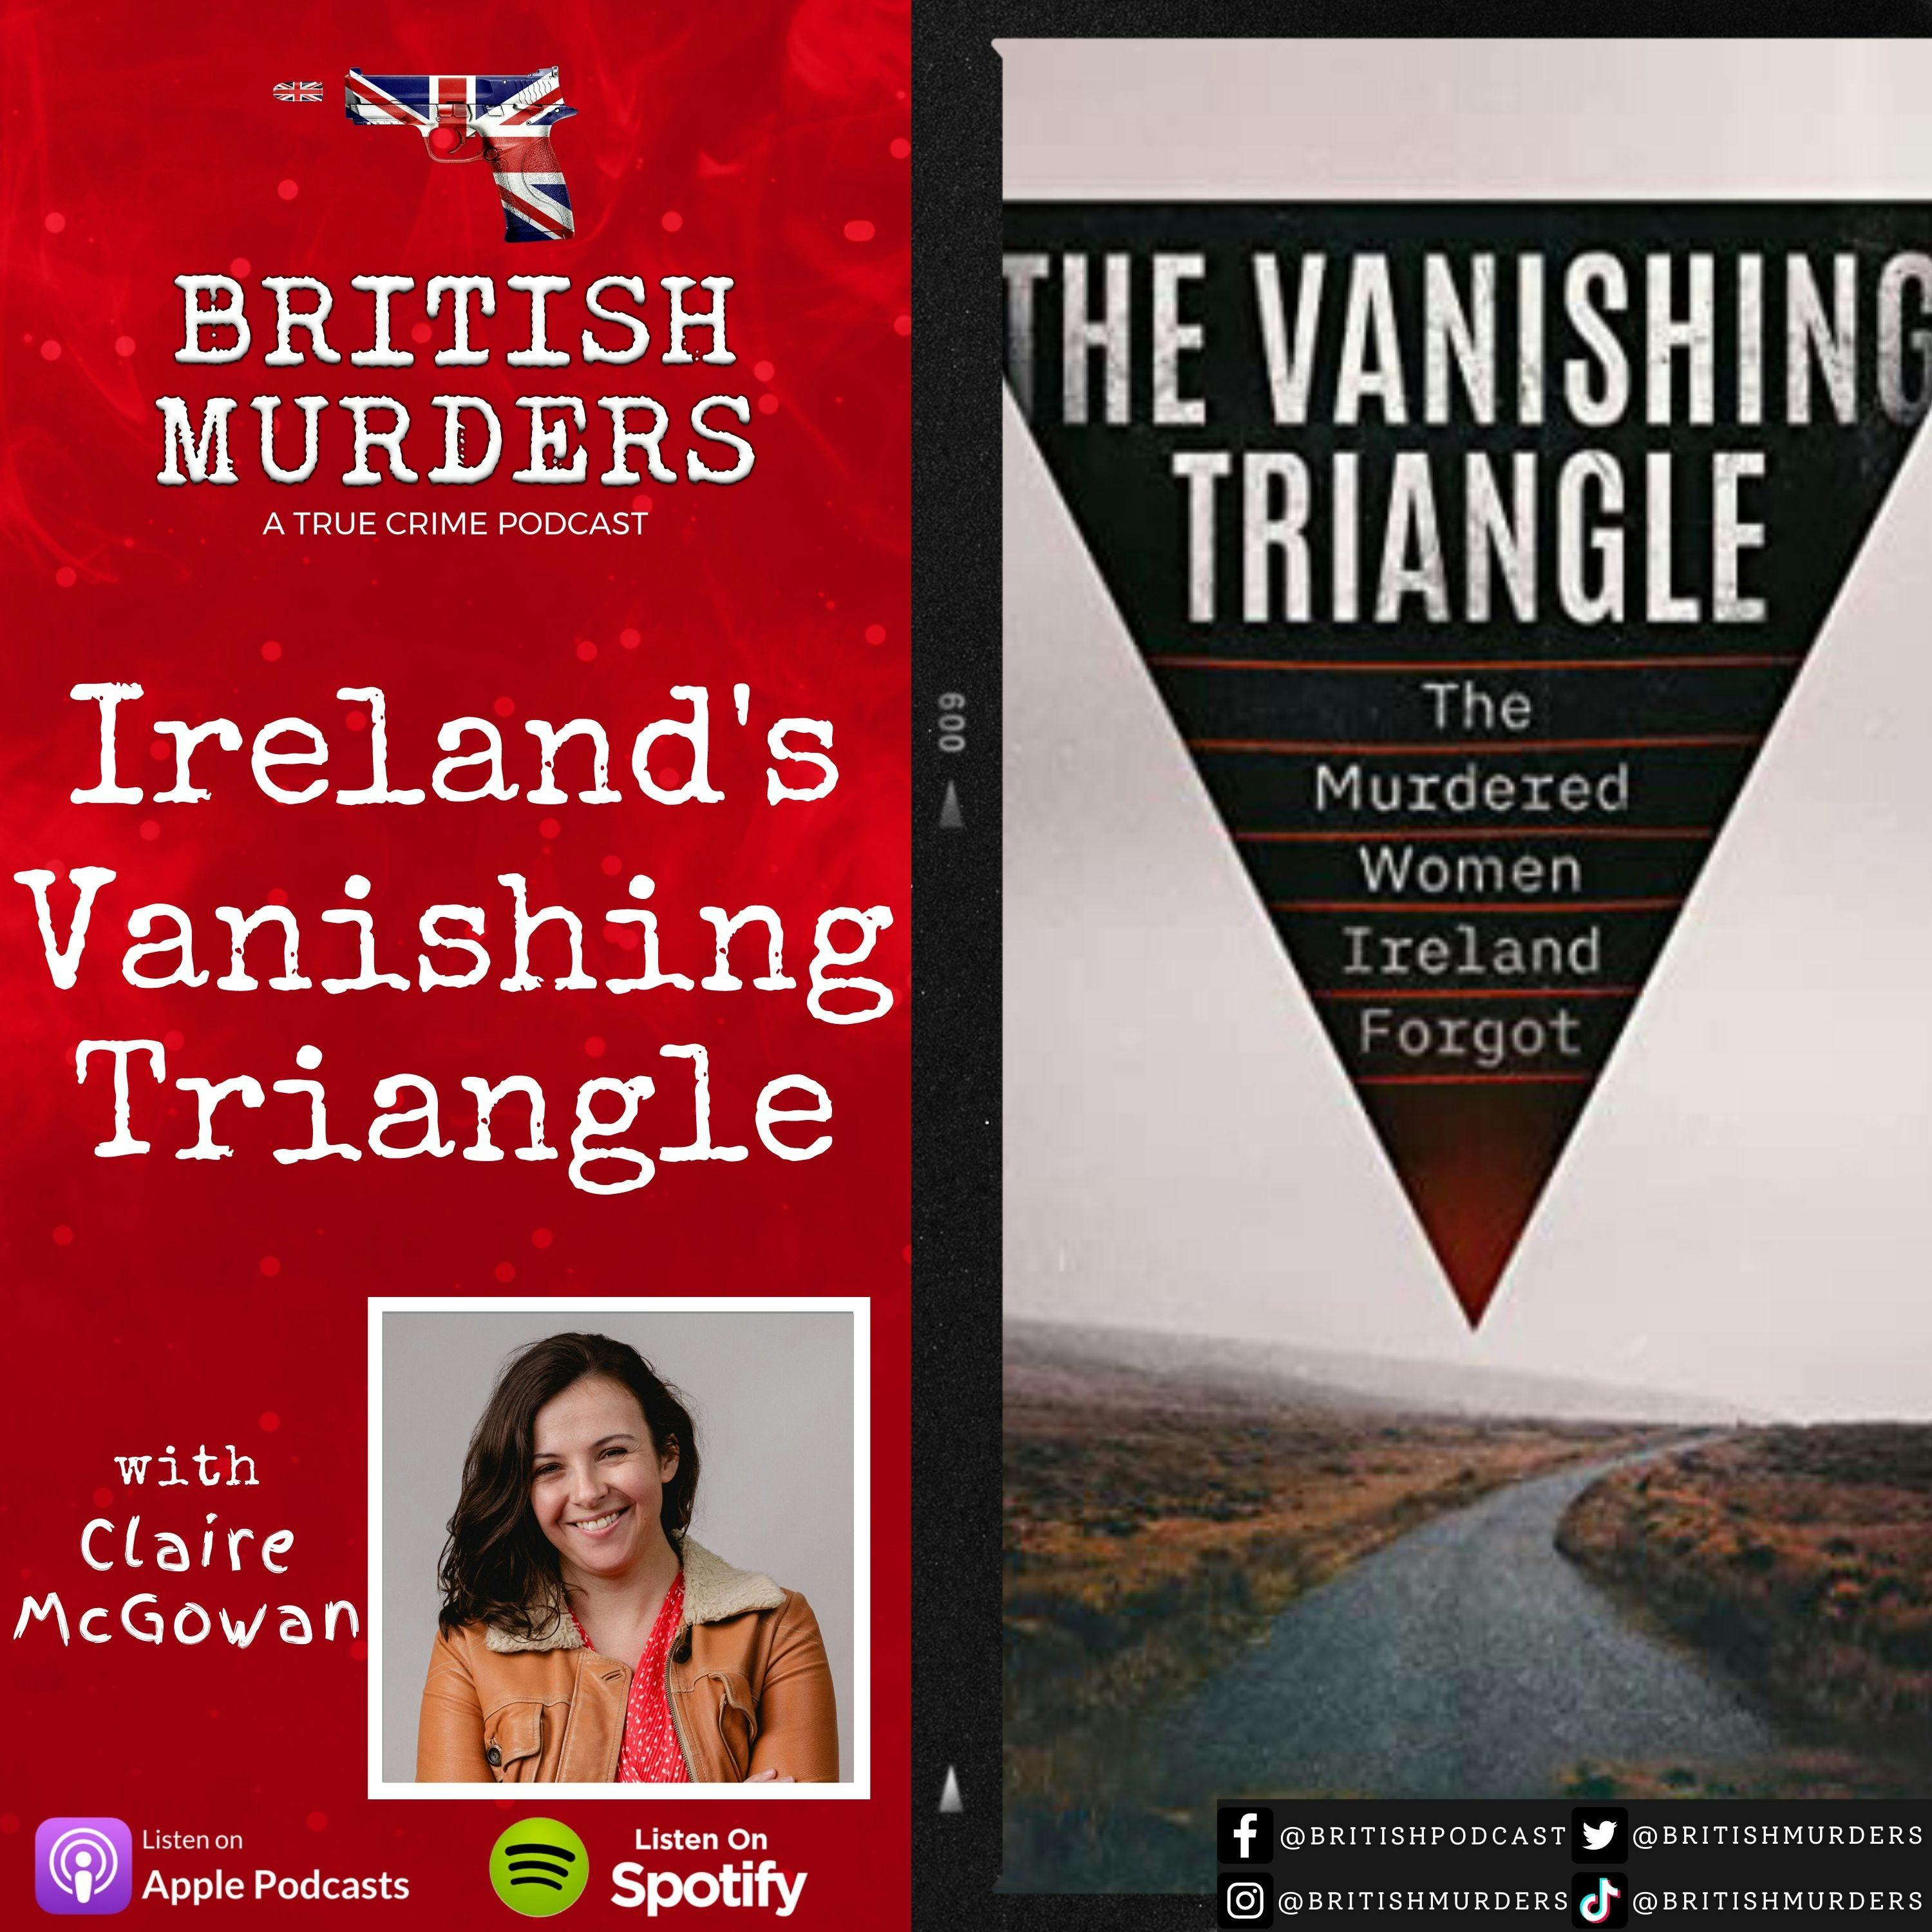 Ireland's Vanishing Triangle with Claire McGowan (Crime Fiction Writer)